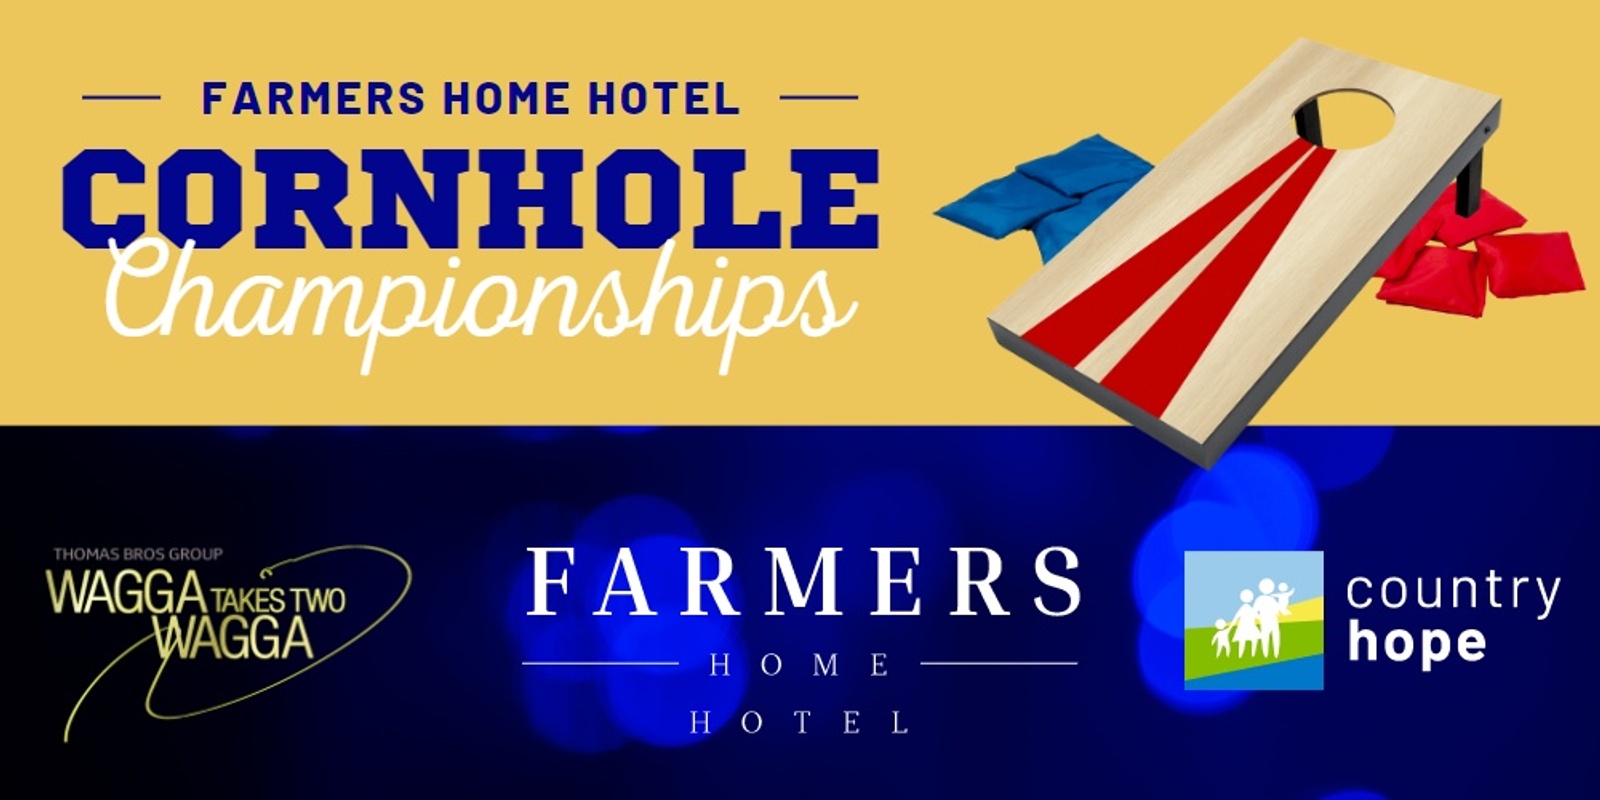 Banner image for FARMERS HOME HOTEL Cornhole Championships